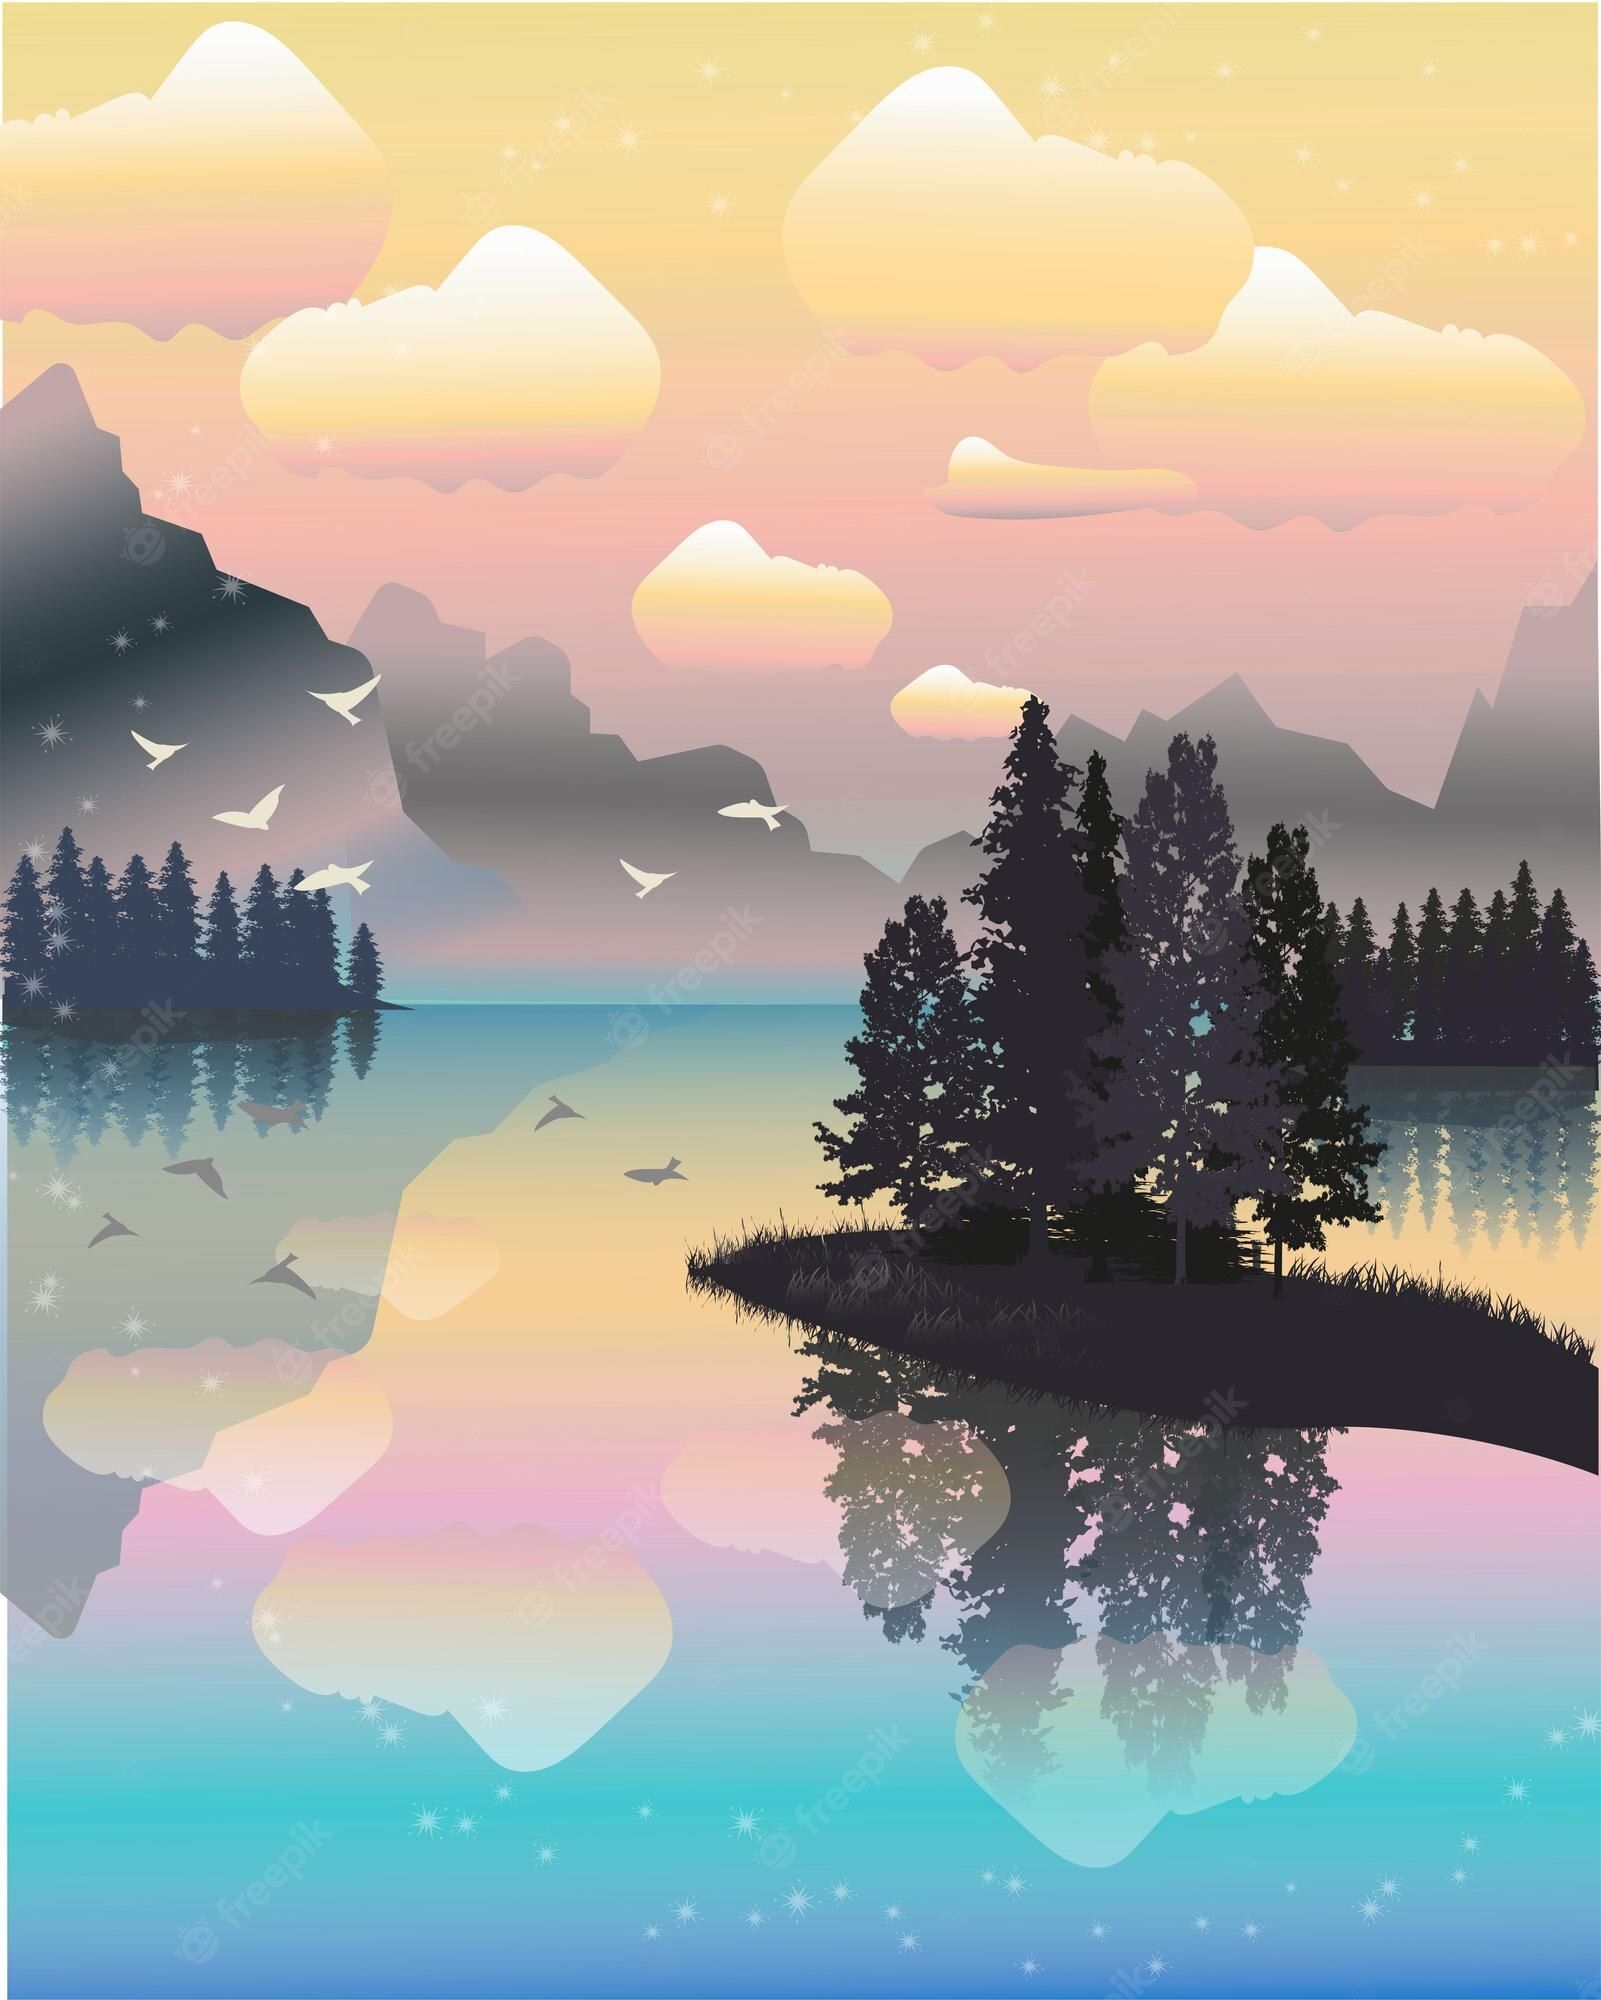 A vector illustration of a forest with a lake - Pansexual